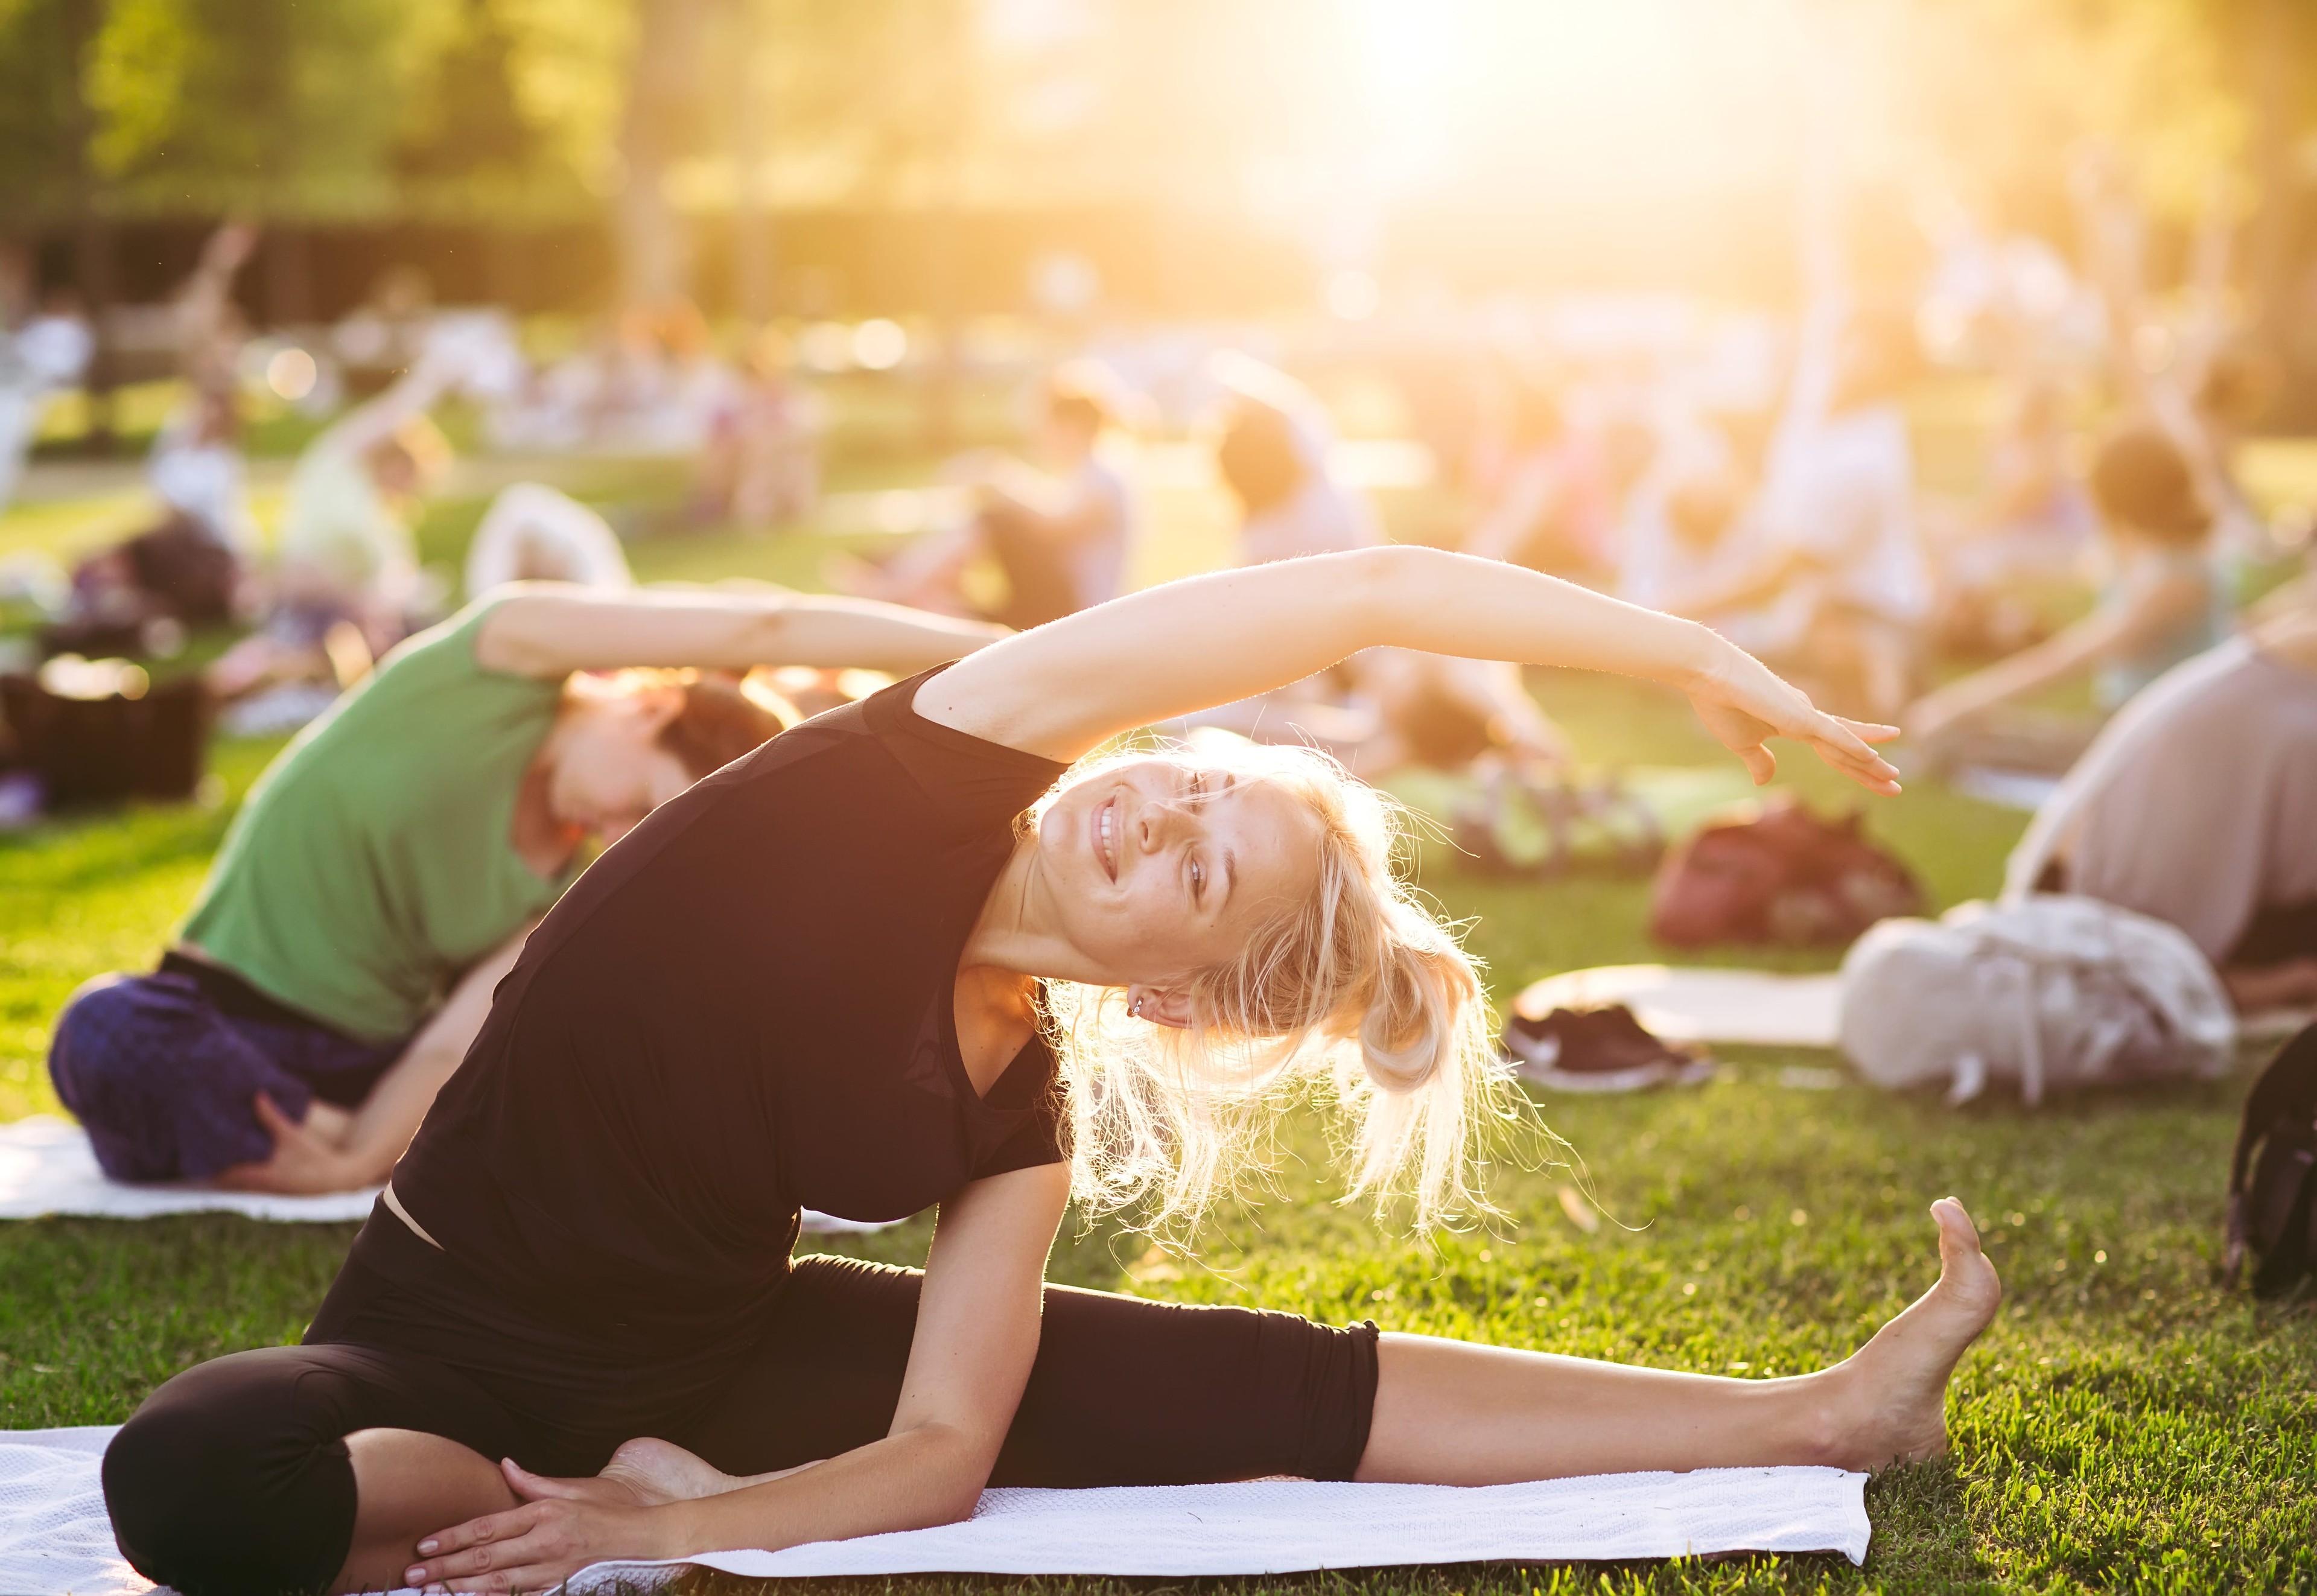 Working Out In Nature – Your Living City